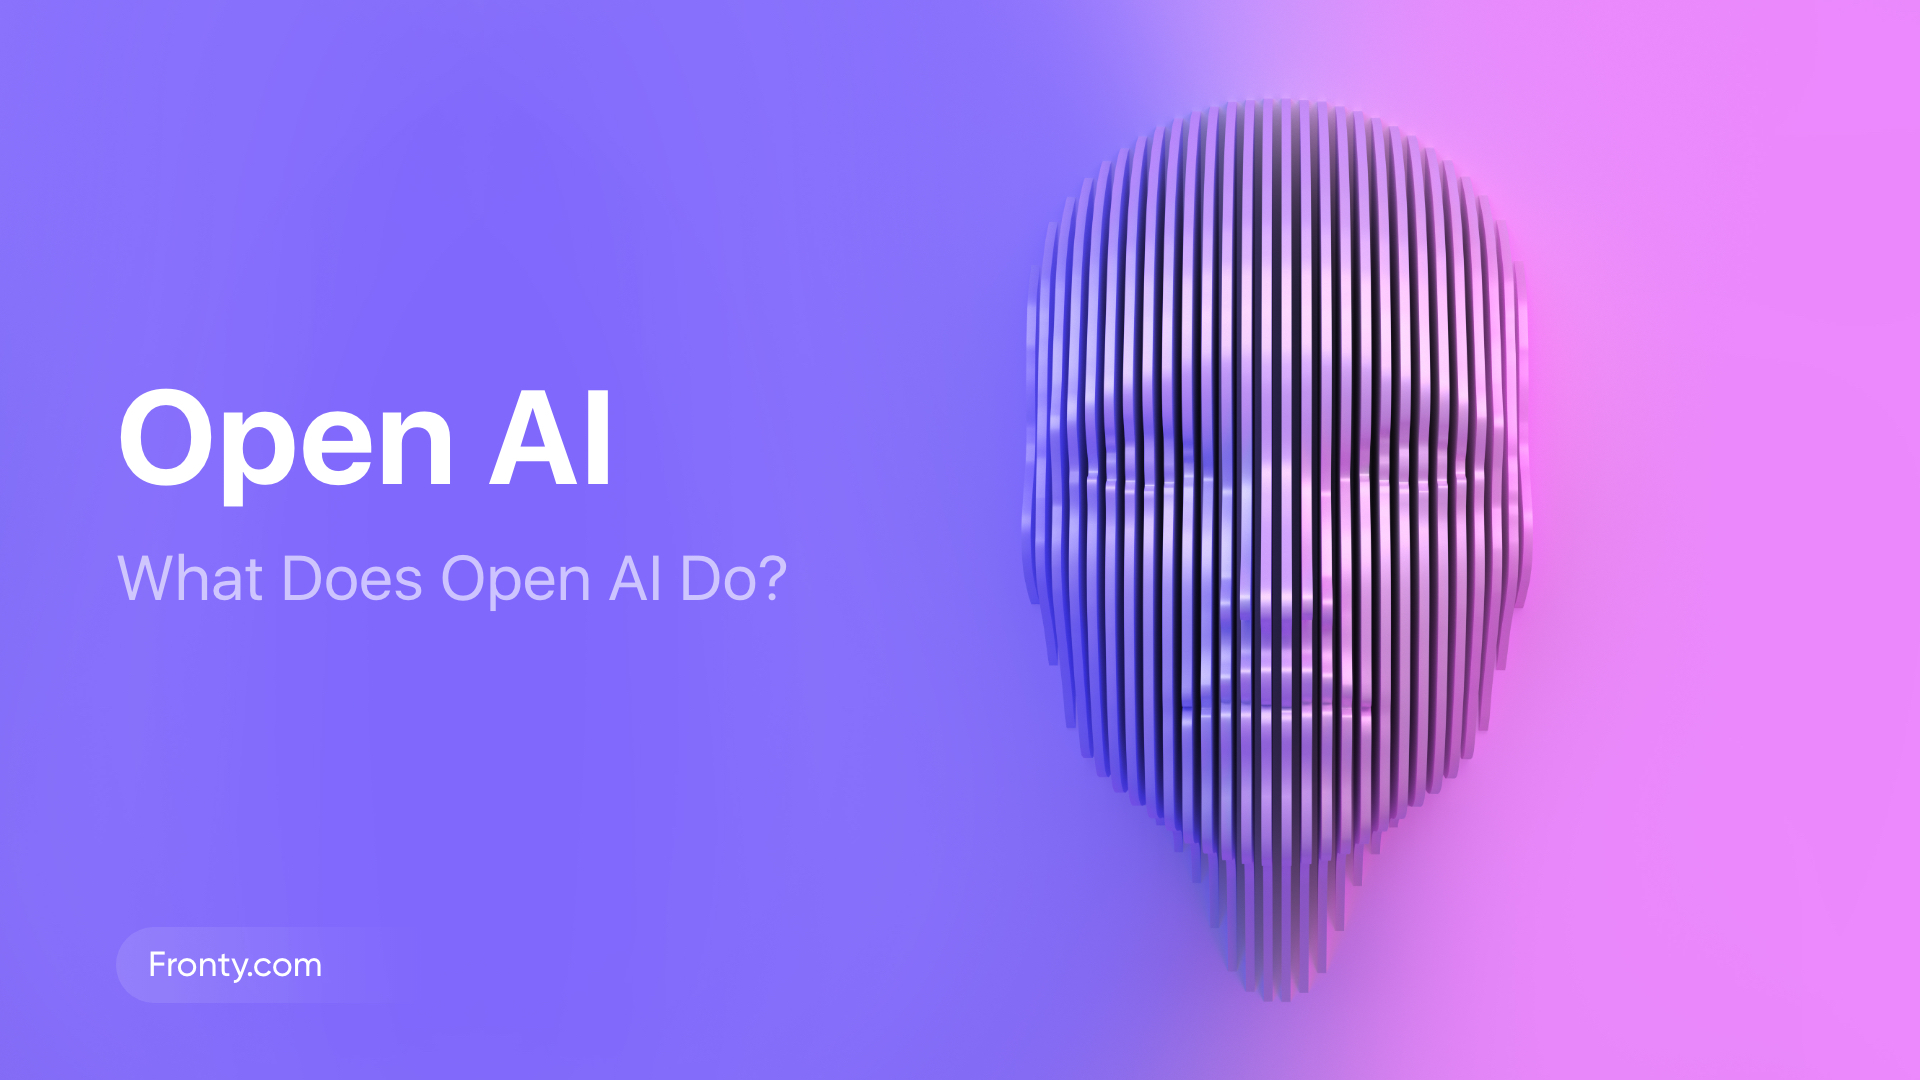 Microsoft's $10 Billion Investment in OpenAI: How it Could Impact the AI Industry and Stock Value